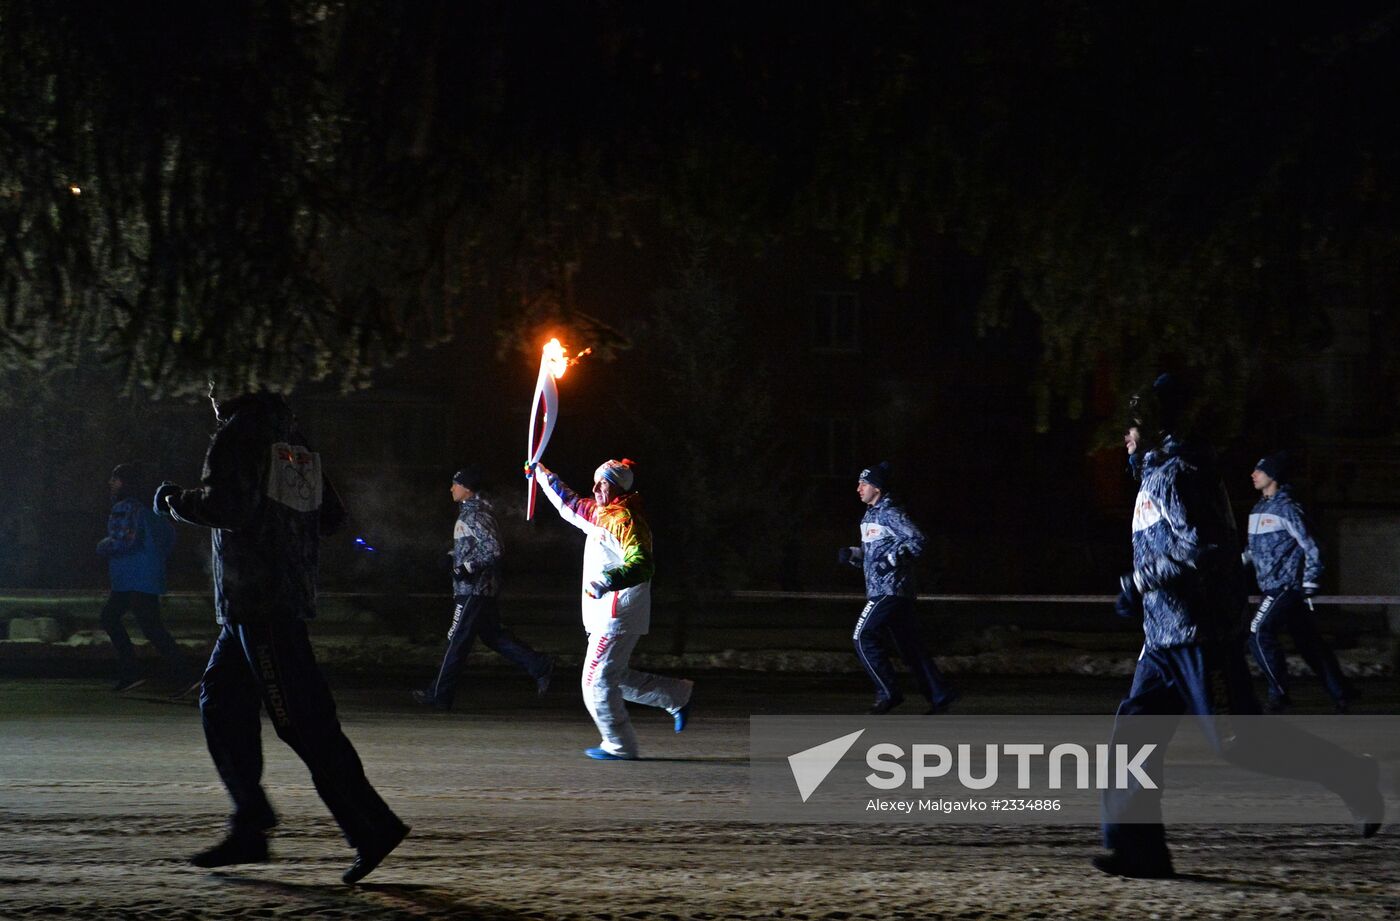 Olympic torch relay. Omsk region